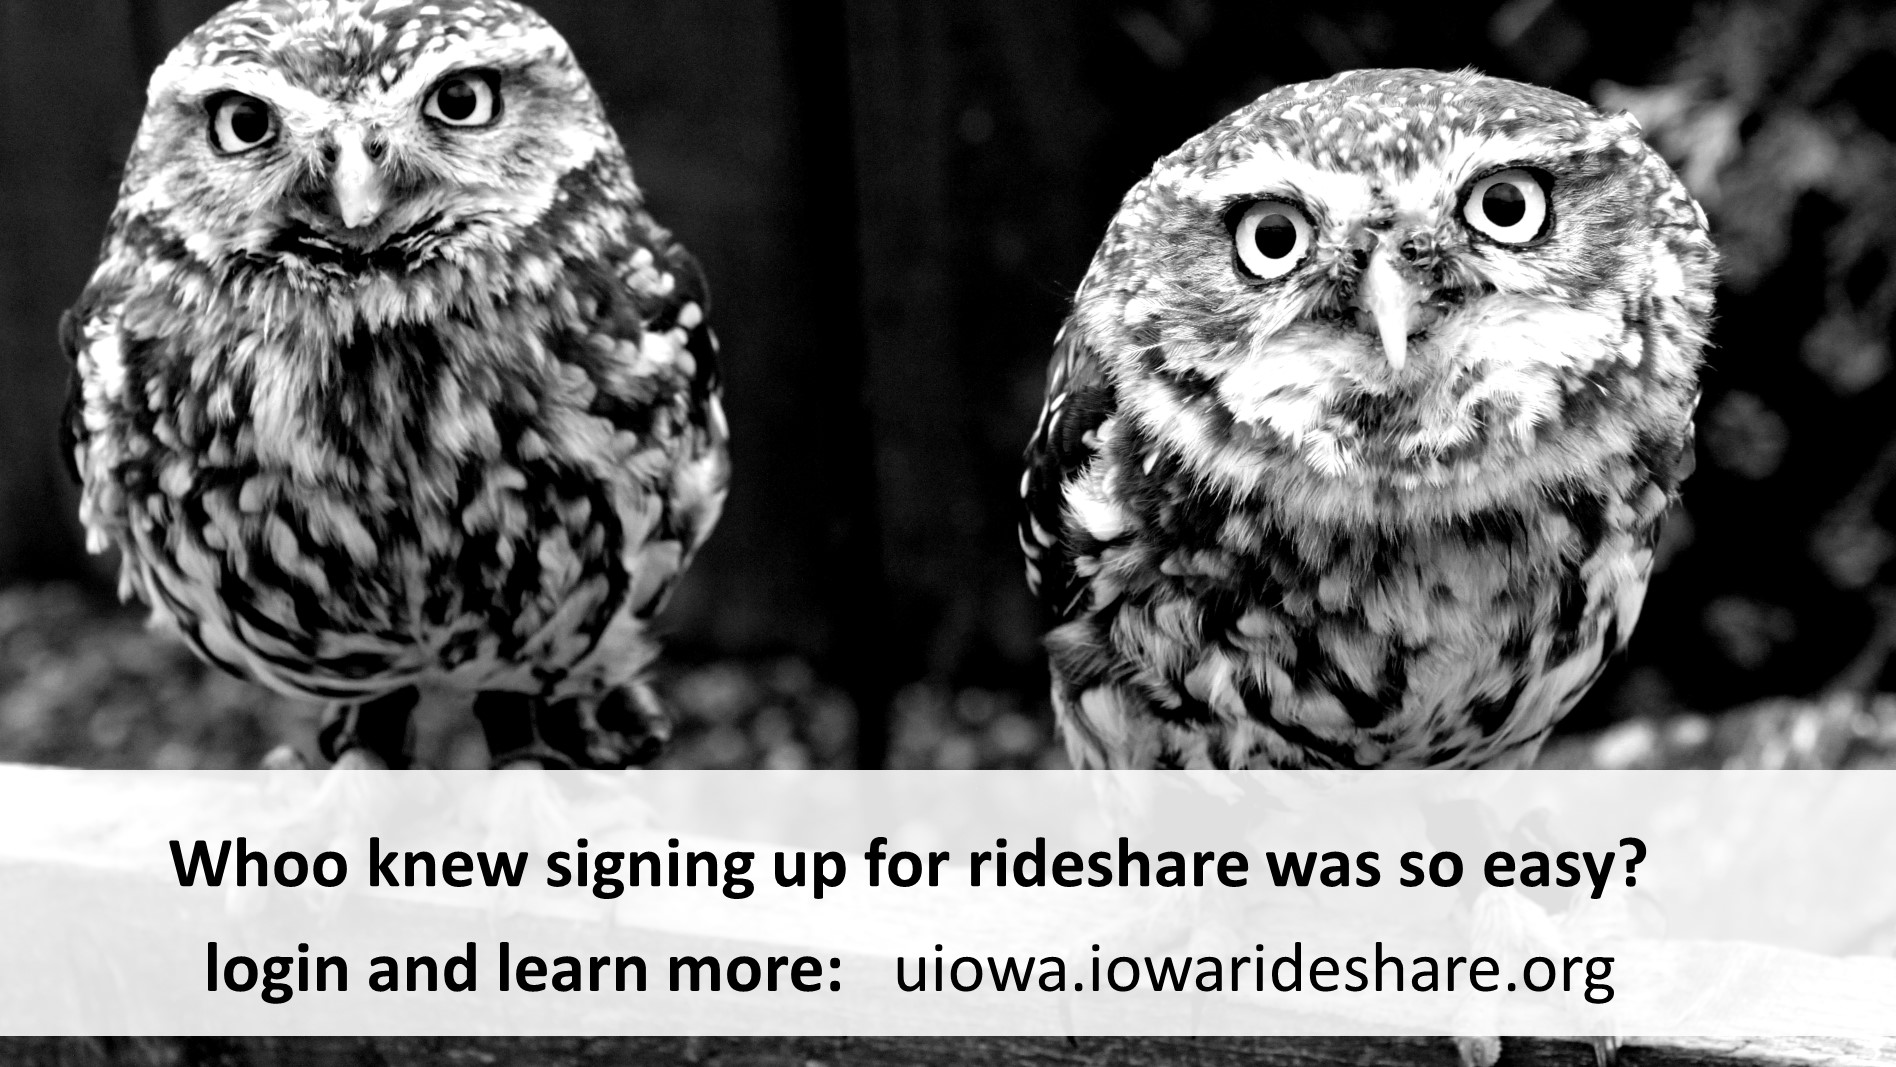 Sign up for UI Ride Share